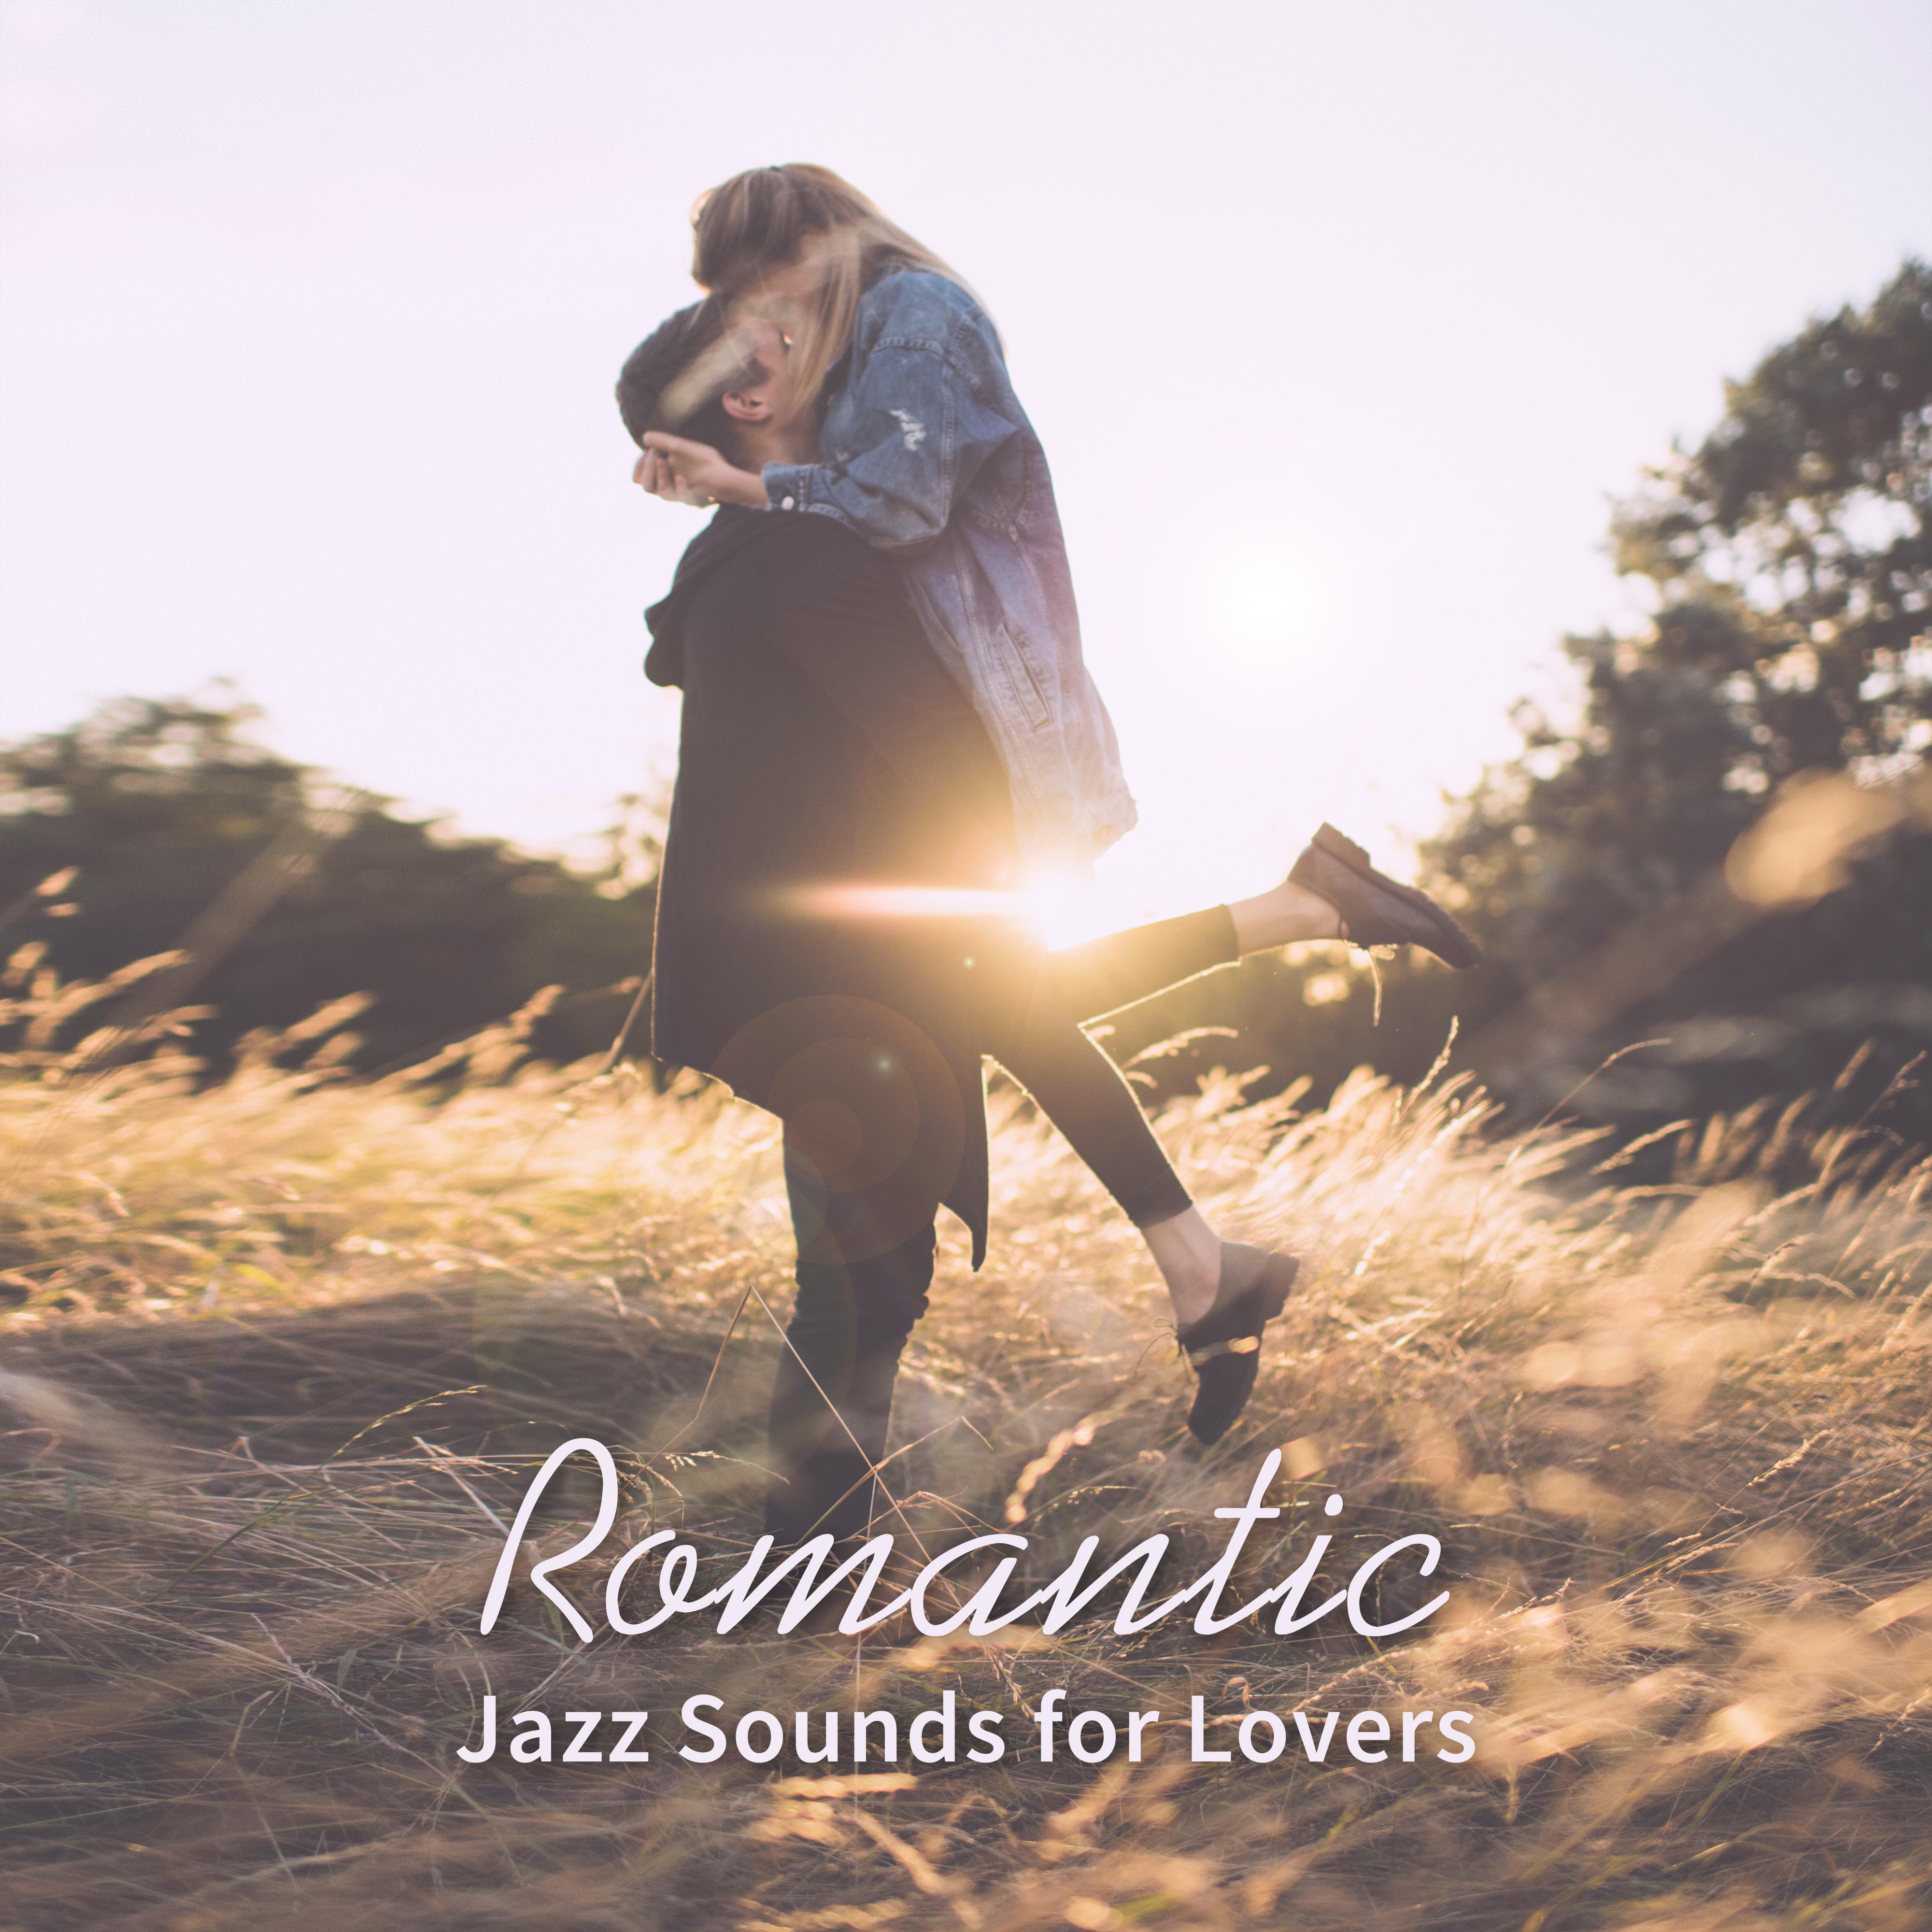 Romantic Jazz Sounds for Lovers  Calming Music for Sensual Evening, Hot Sounds, Jazz Memories